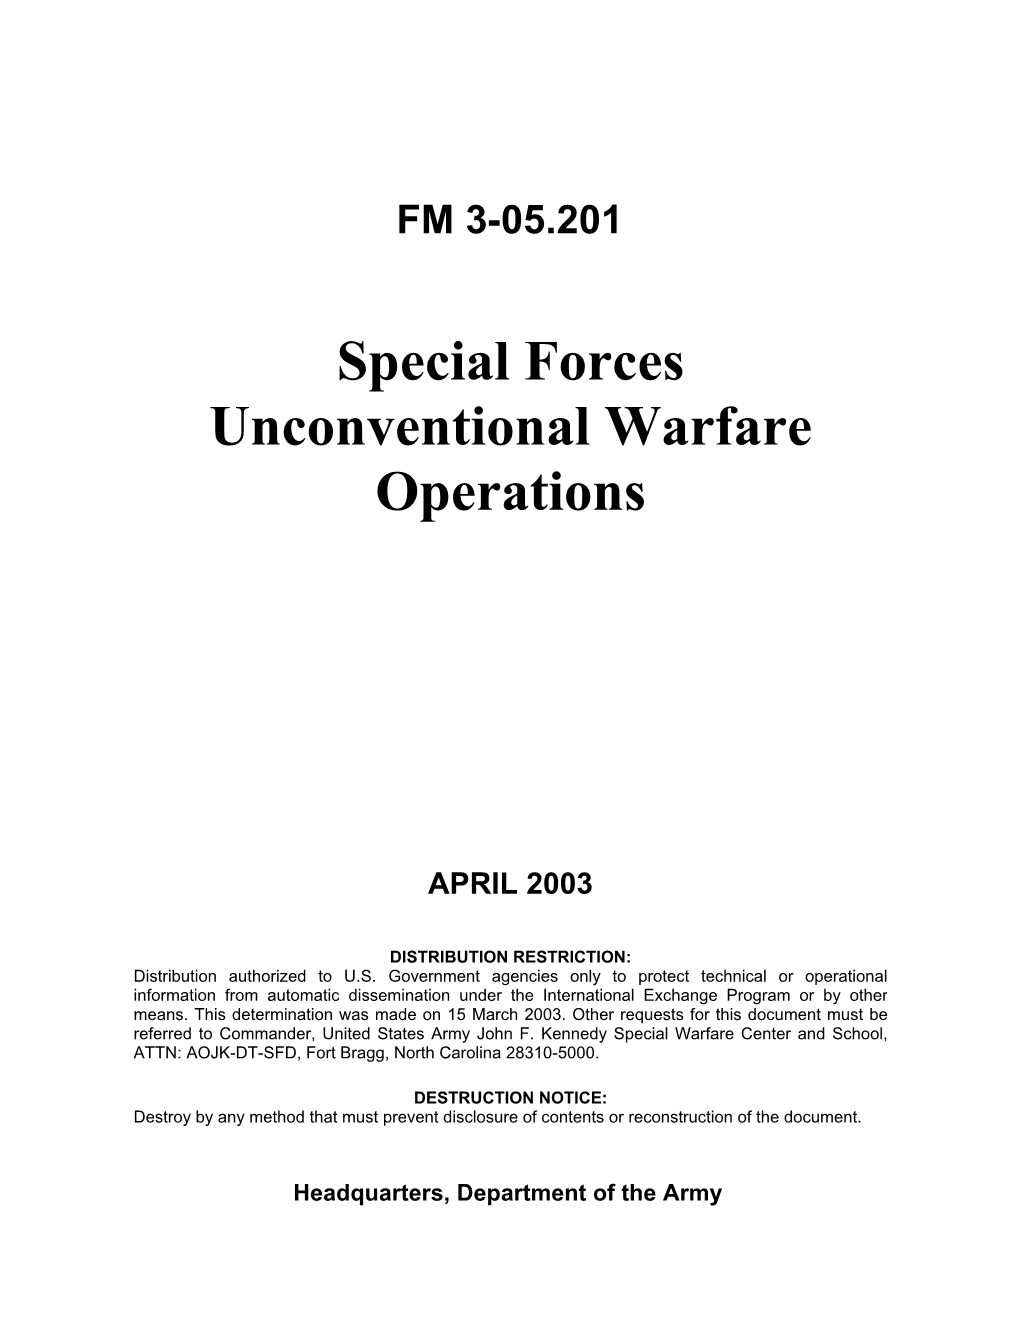 FM 3-05.201: Special Forces Unconventional Warfare Operations